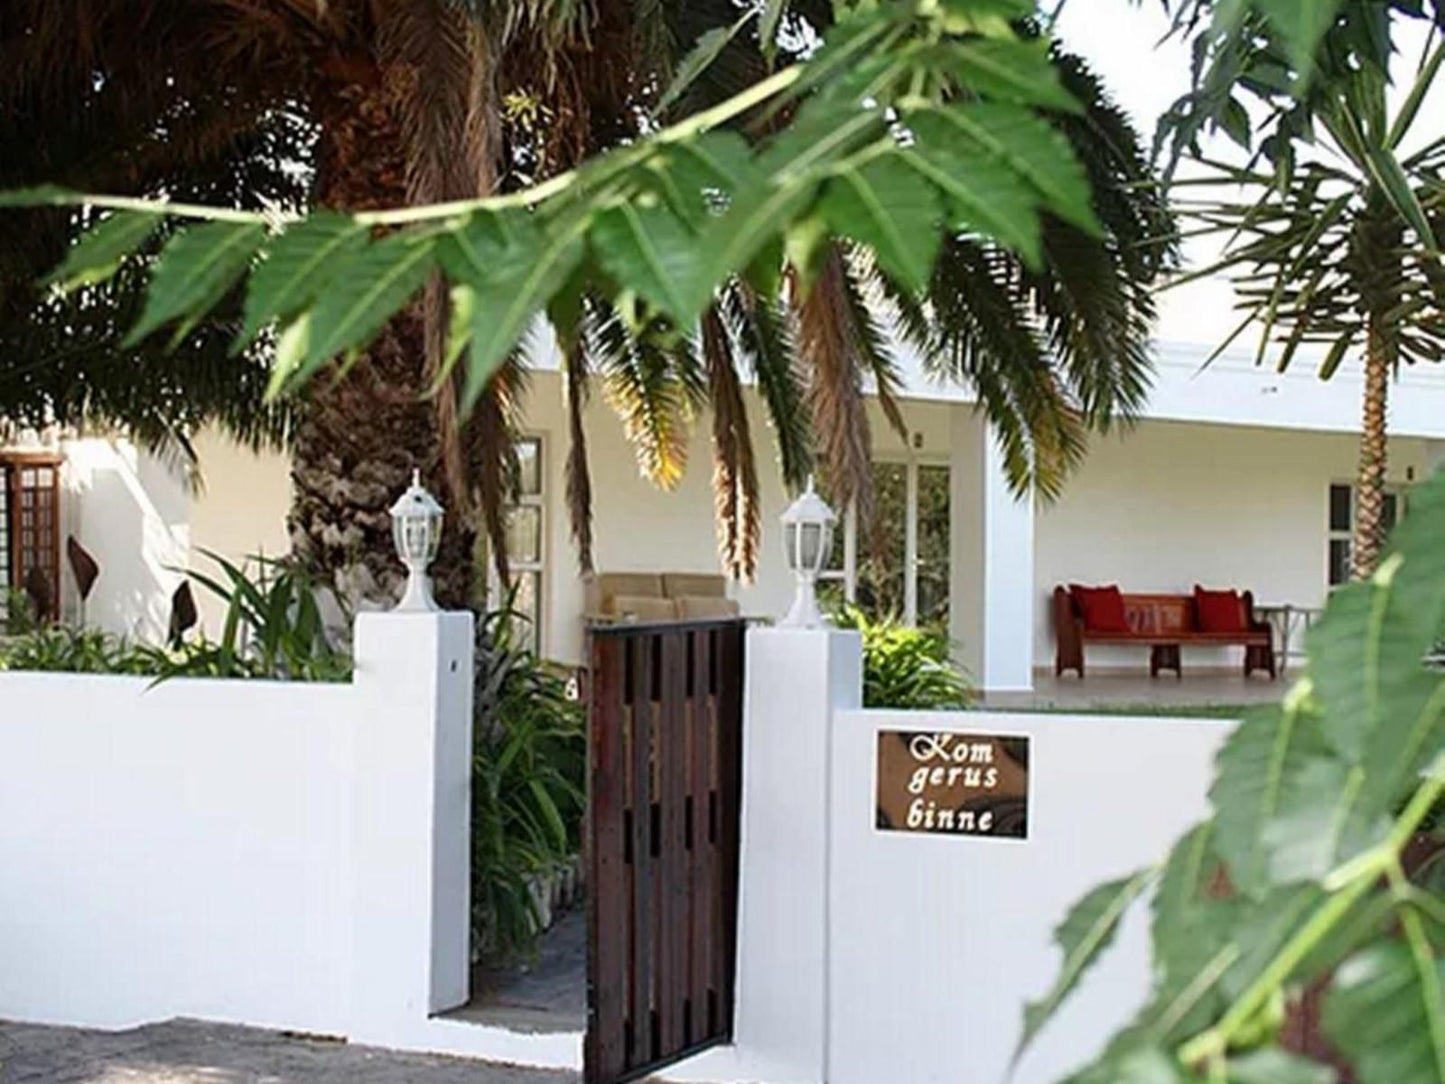 Mecca Guest House Hotazel Northern Cape South Africa House, Building, Architecture, Palm Tree, Plant, Nature, Wood